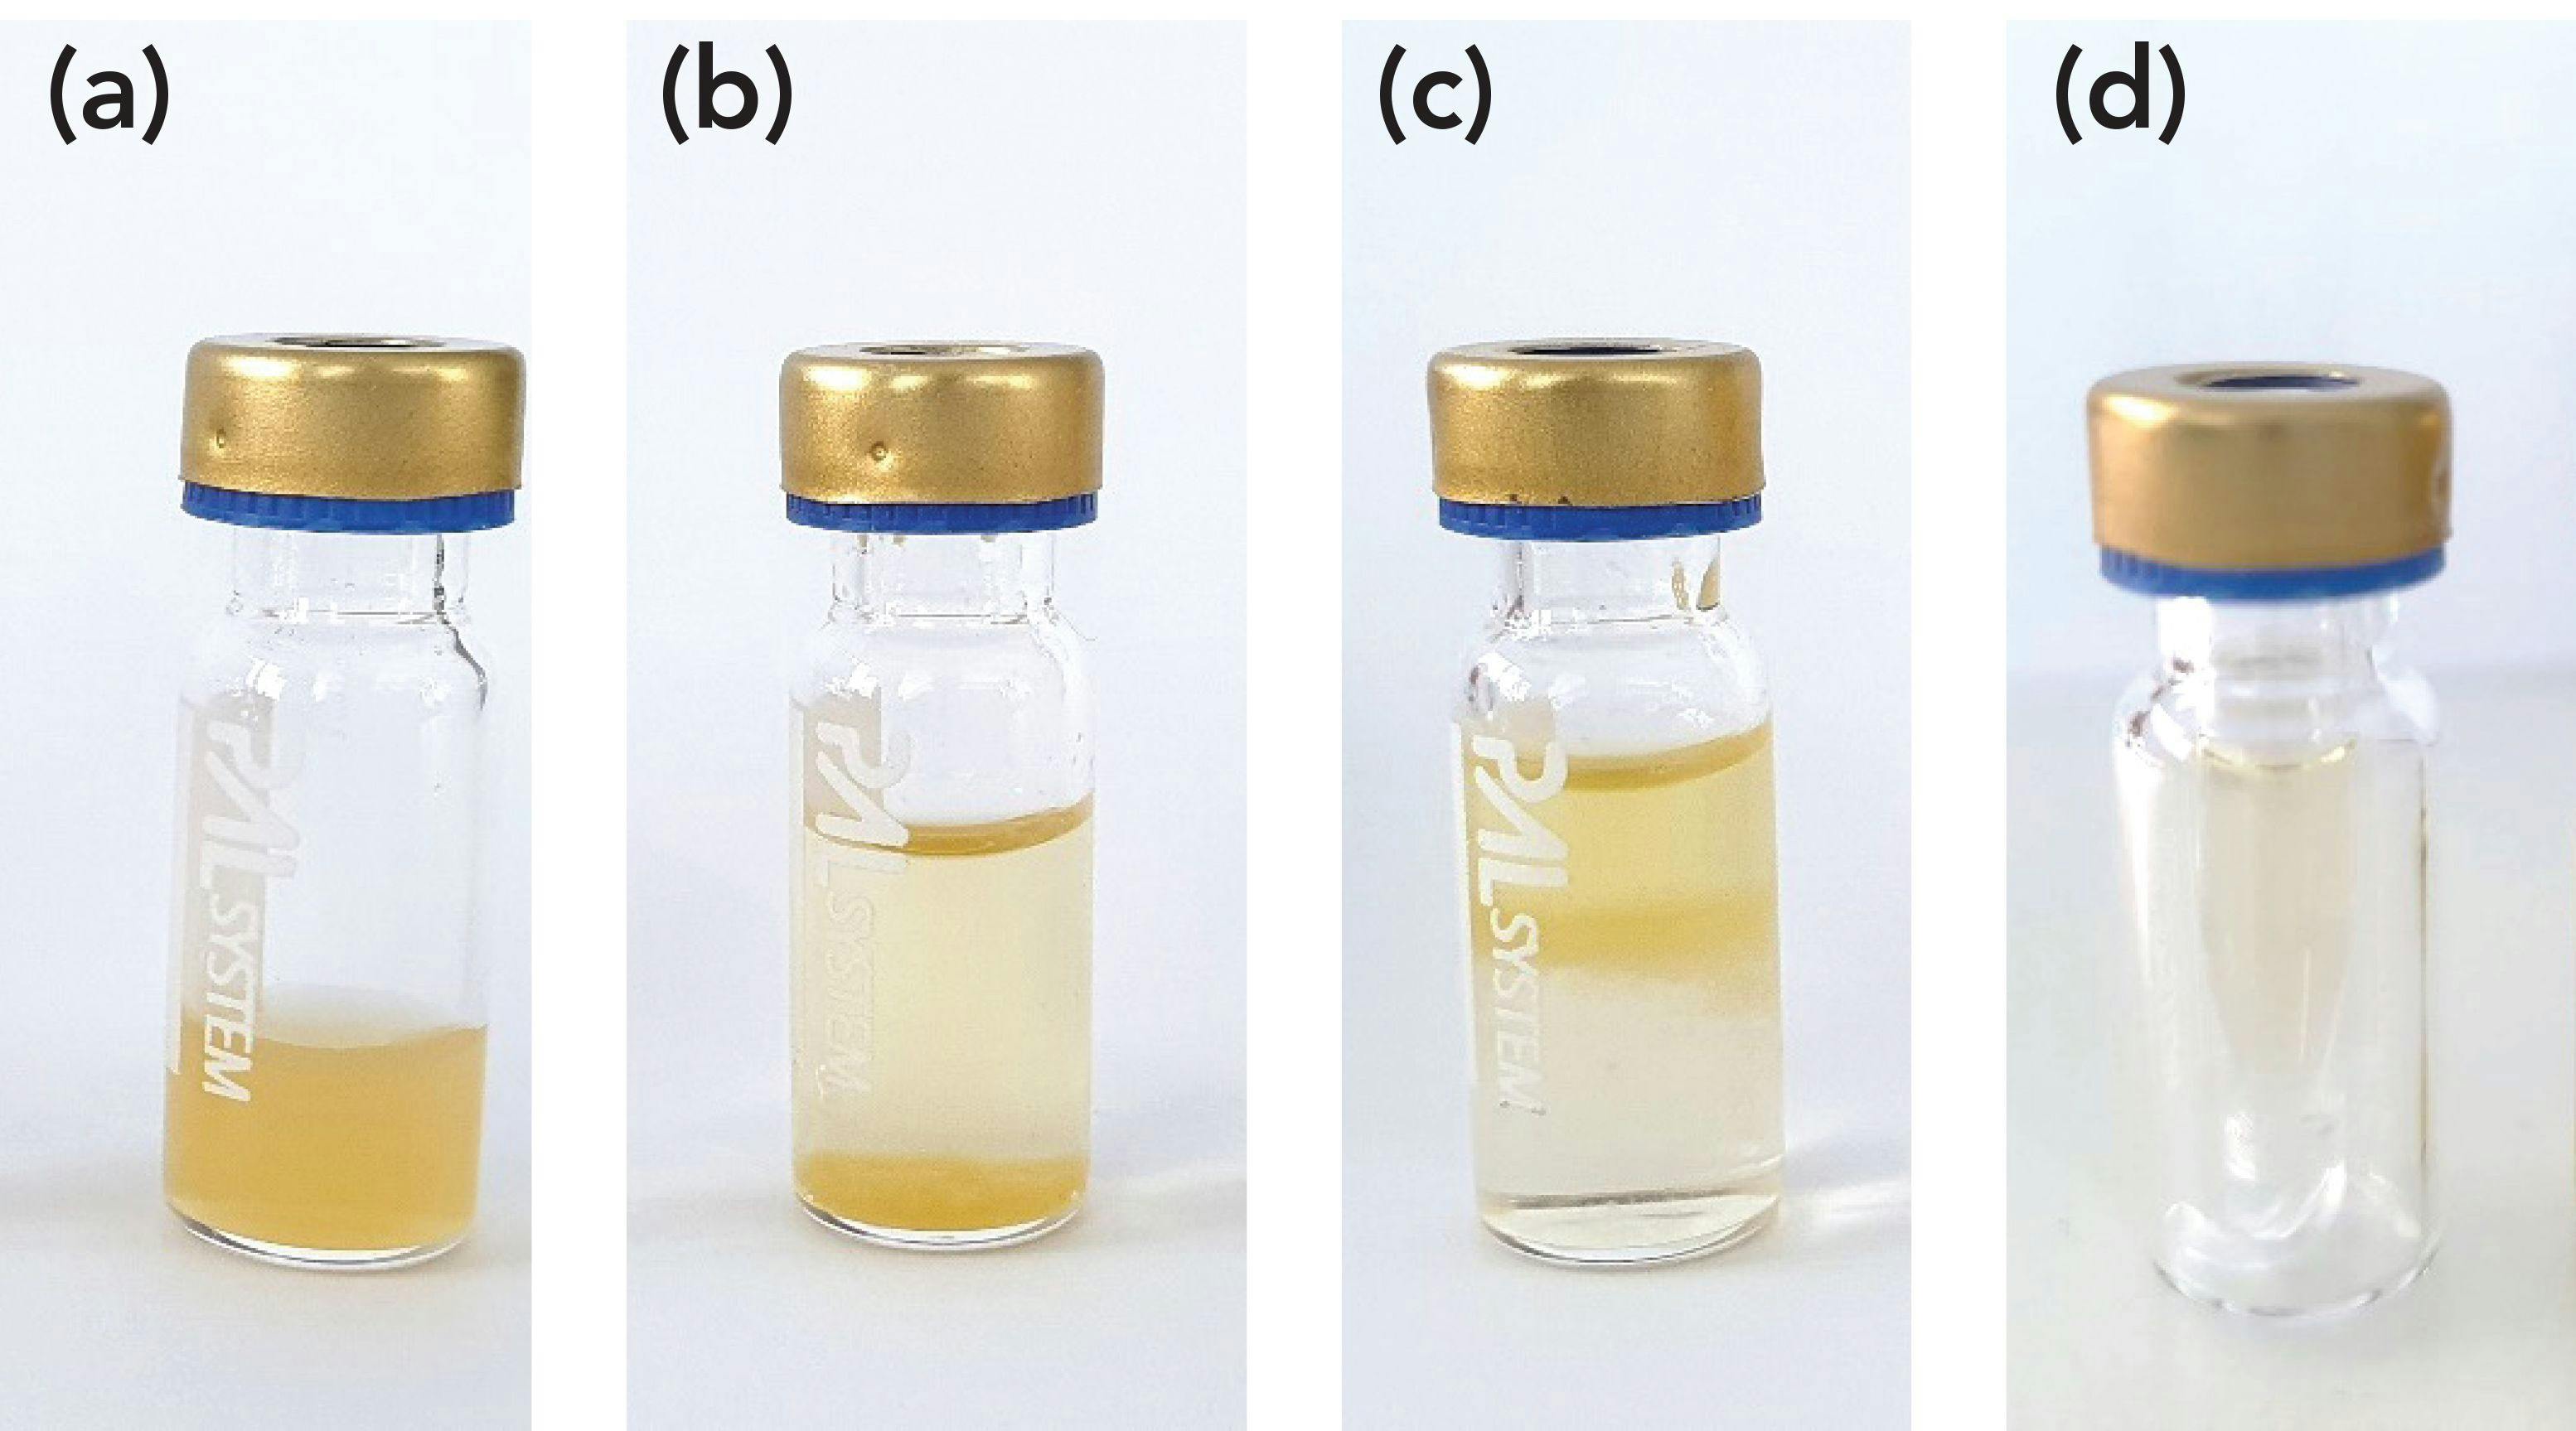 FIGURE 4: Workflow steps visualized in the 2 mL vials of the automated juice extraction and cleanup. Shown are (a) orange juice from the juice box; (b) orange juice and acetonitrile vortexed; (c) orange juice and acetonitrile, with sodium chloride saturated phase separation; and (d) cleaned extract after the μSPE step, injected.